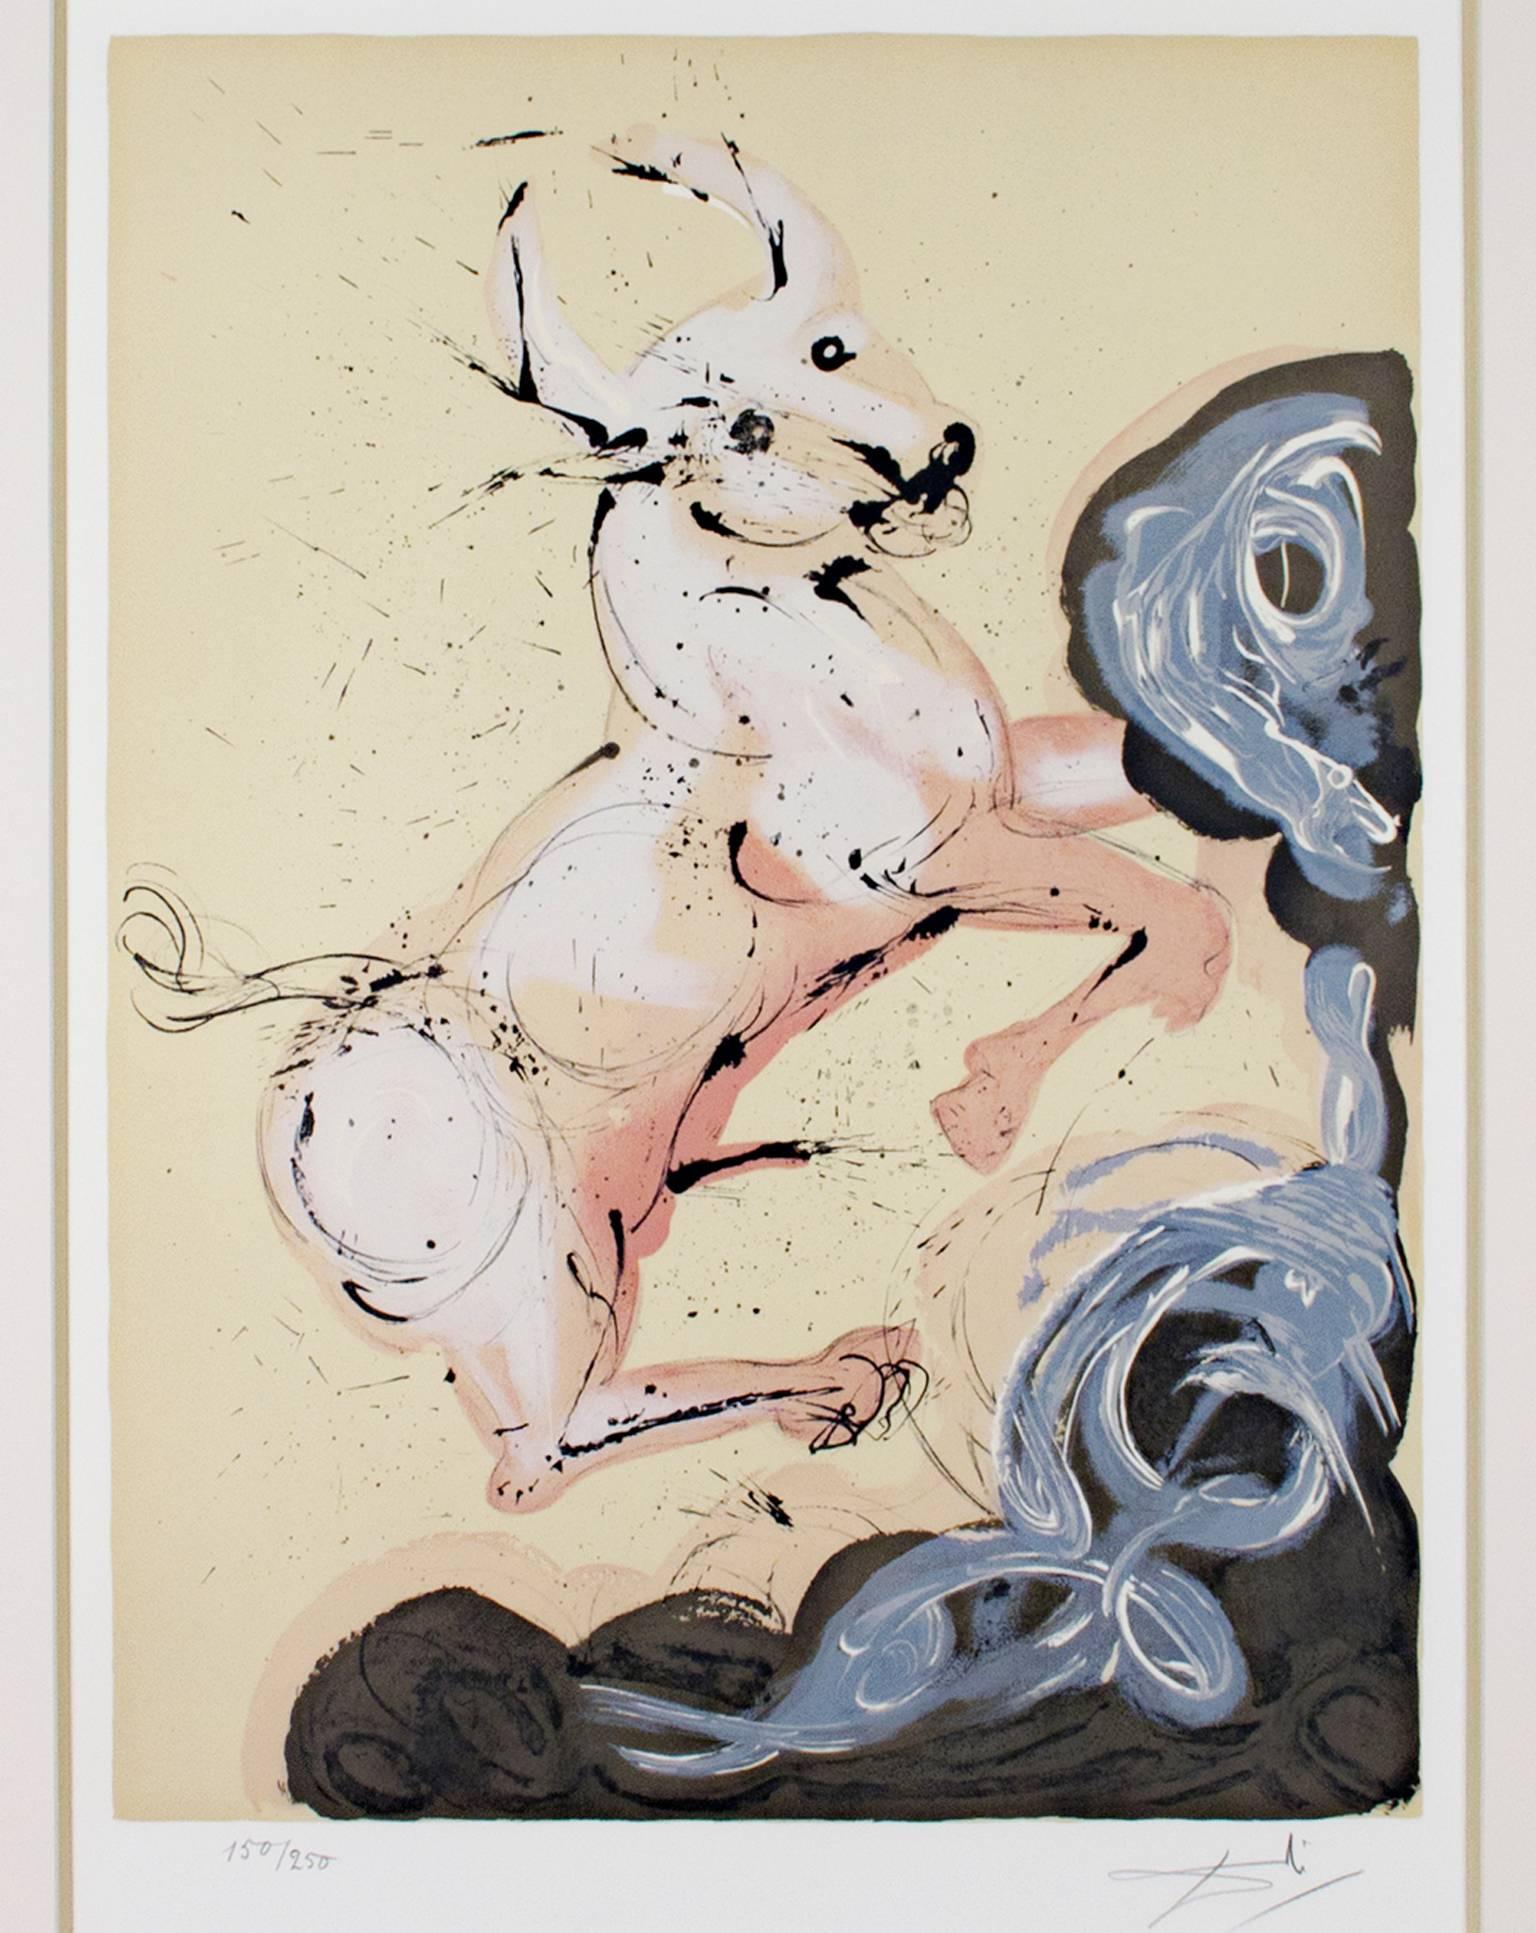 Salvador Dalí Animal Print - "Taurus" from Signs of the Zodiac Series, Original Color Litho signed by Dali